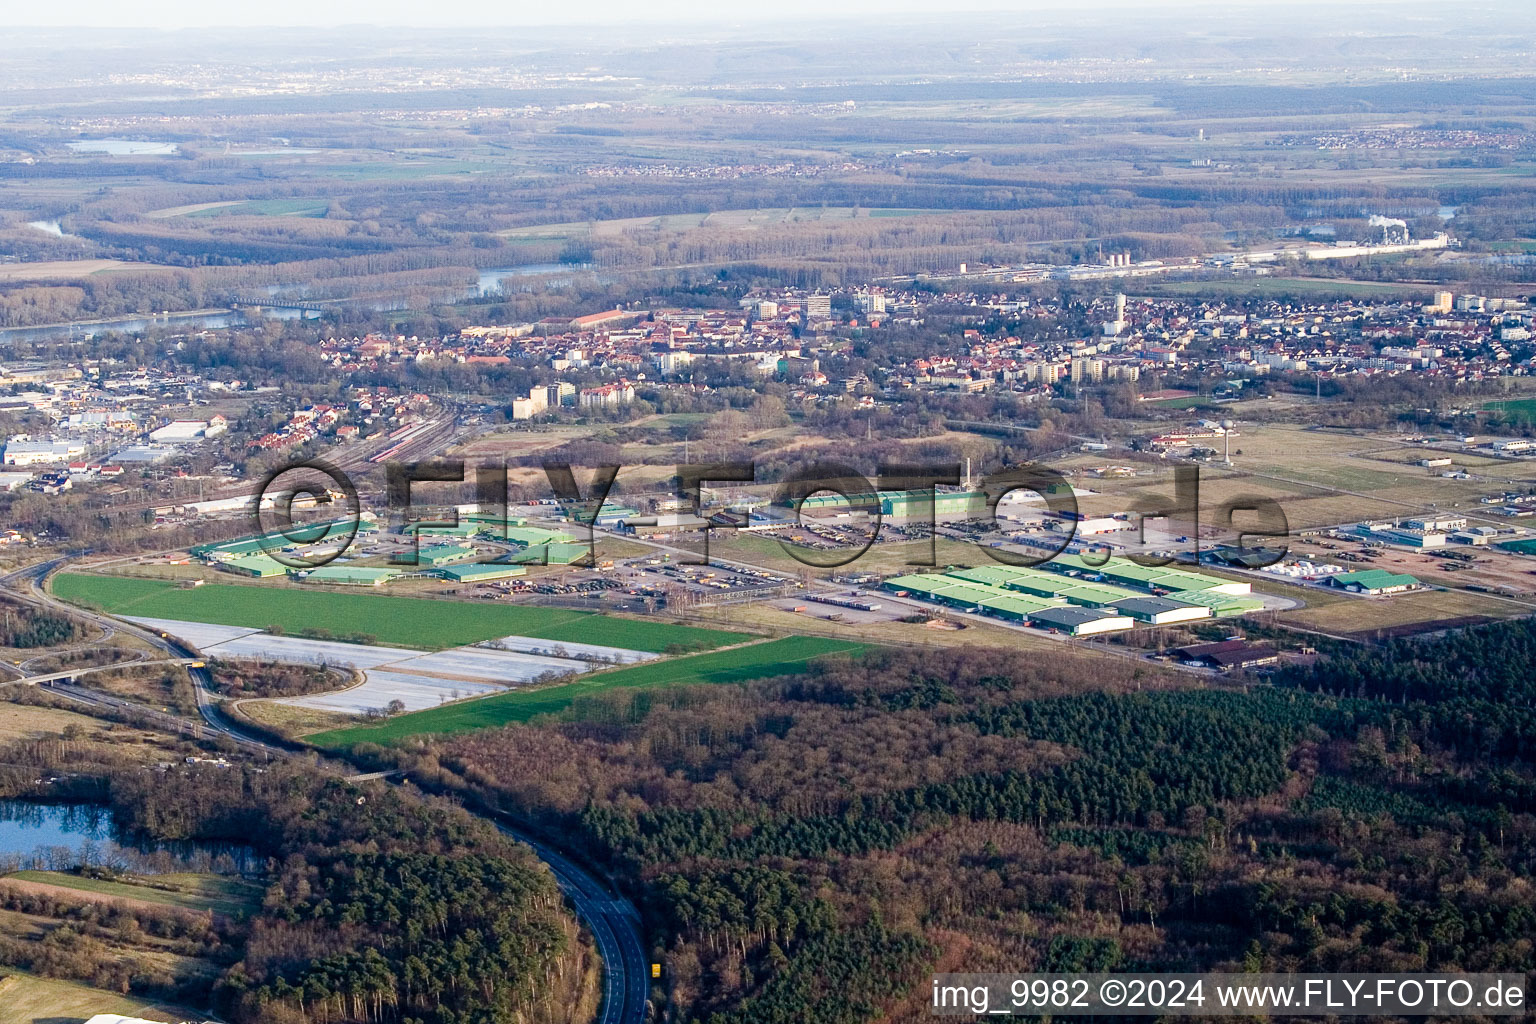 Armed forces in Germersheim in the state Rhineland-Palatinate, Germany from above